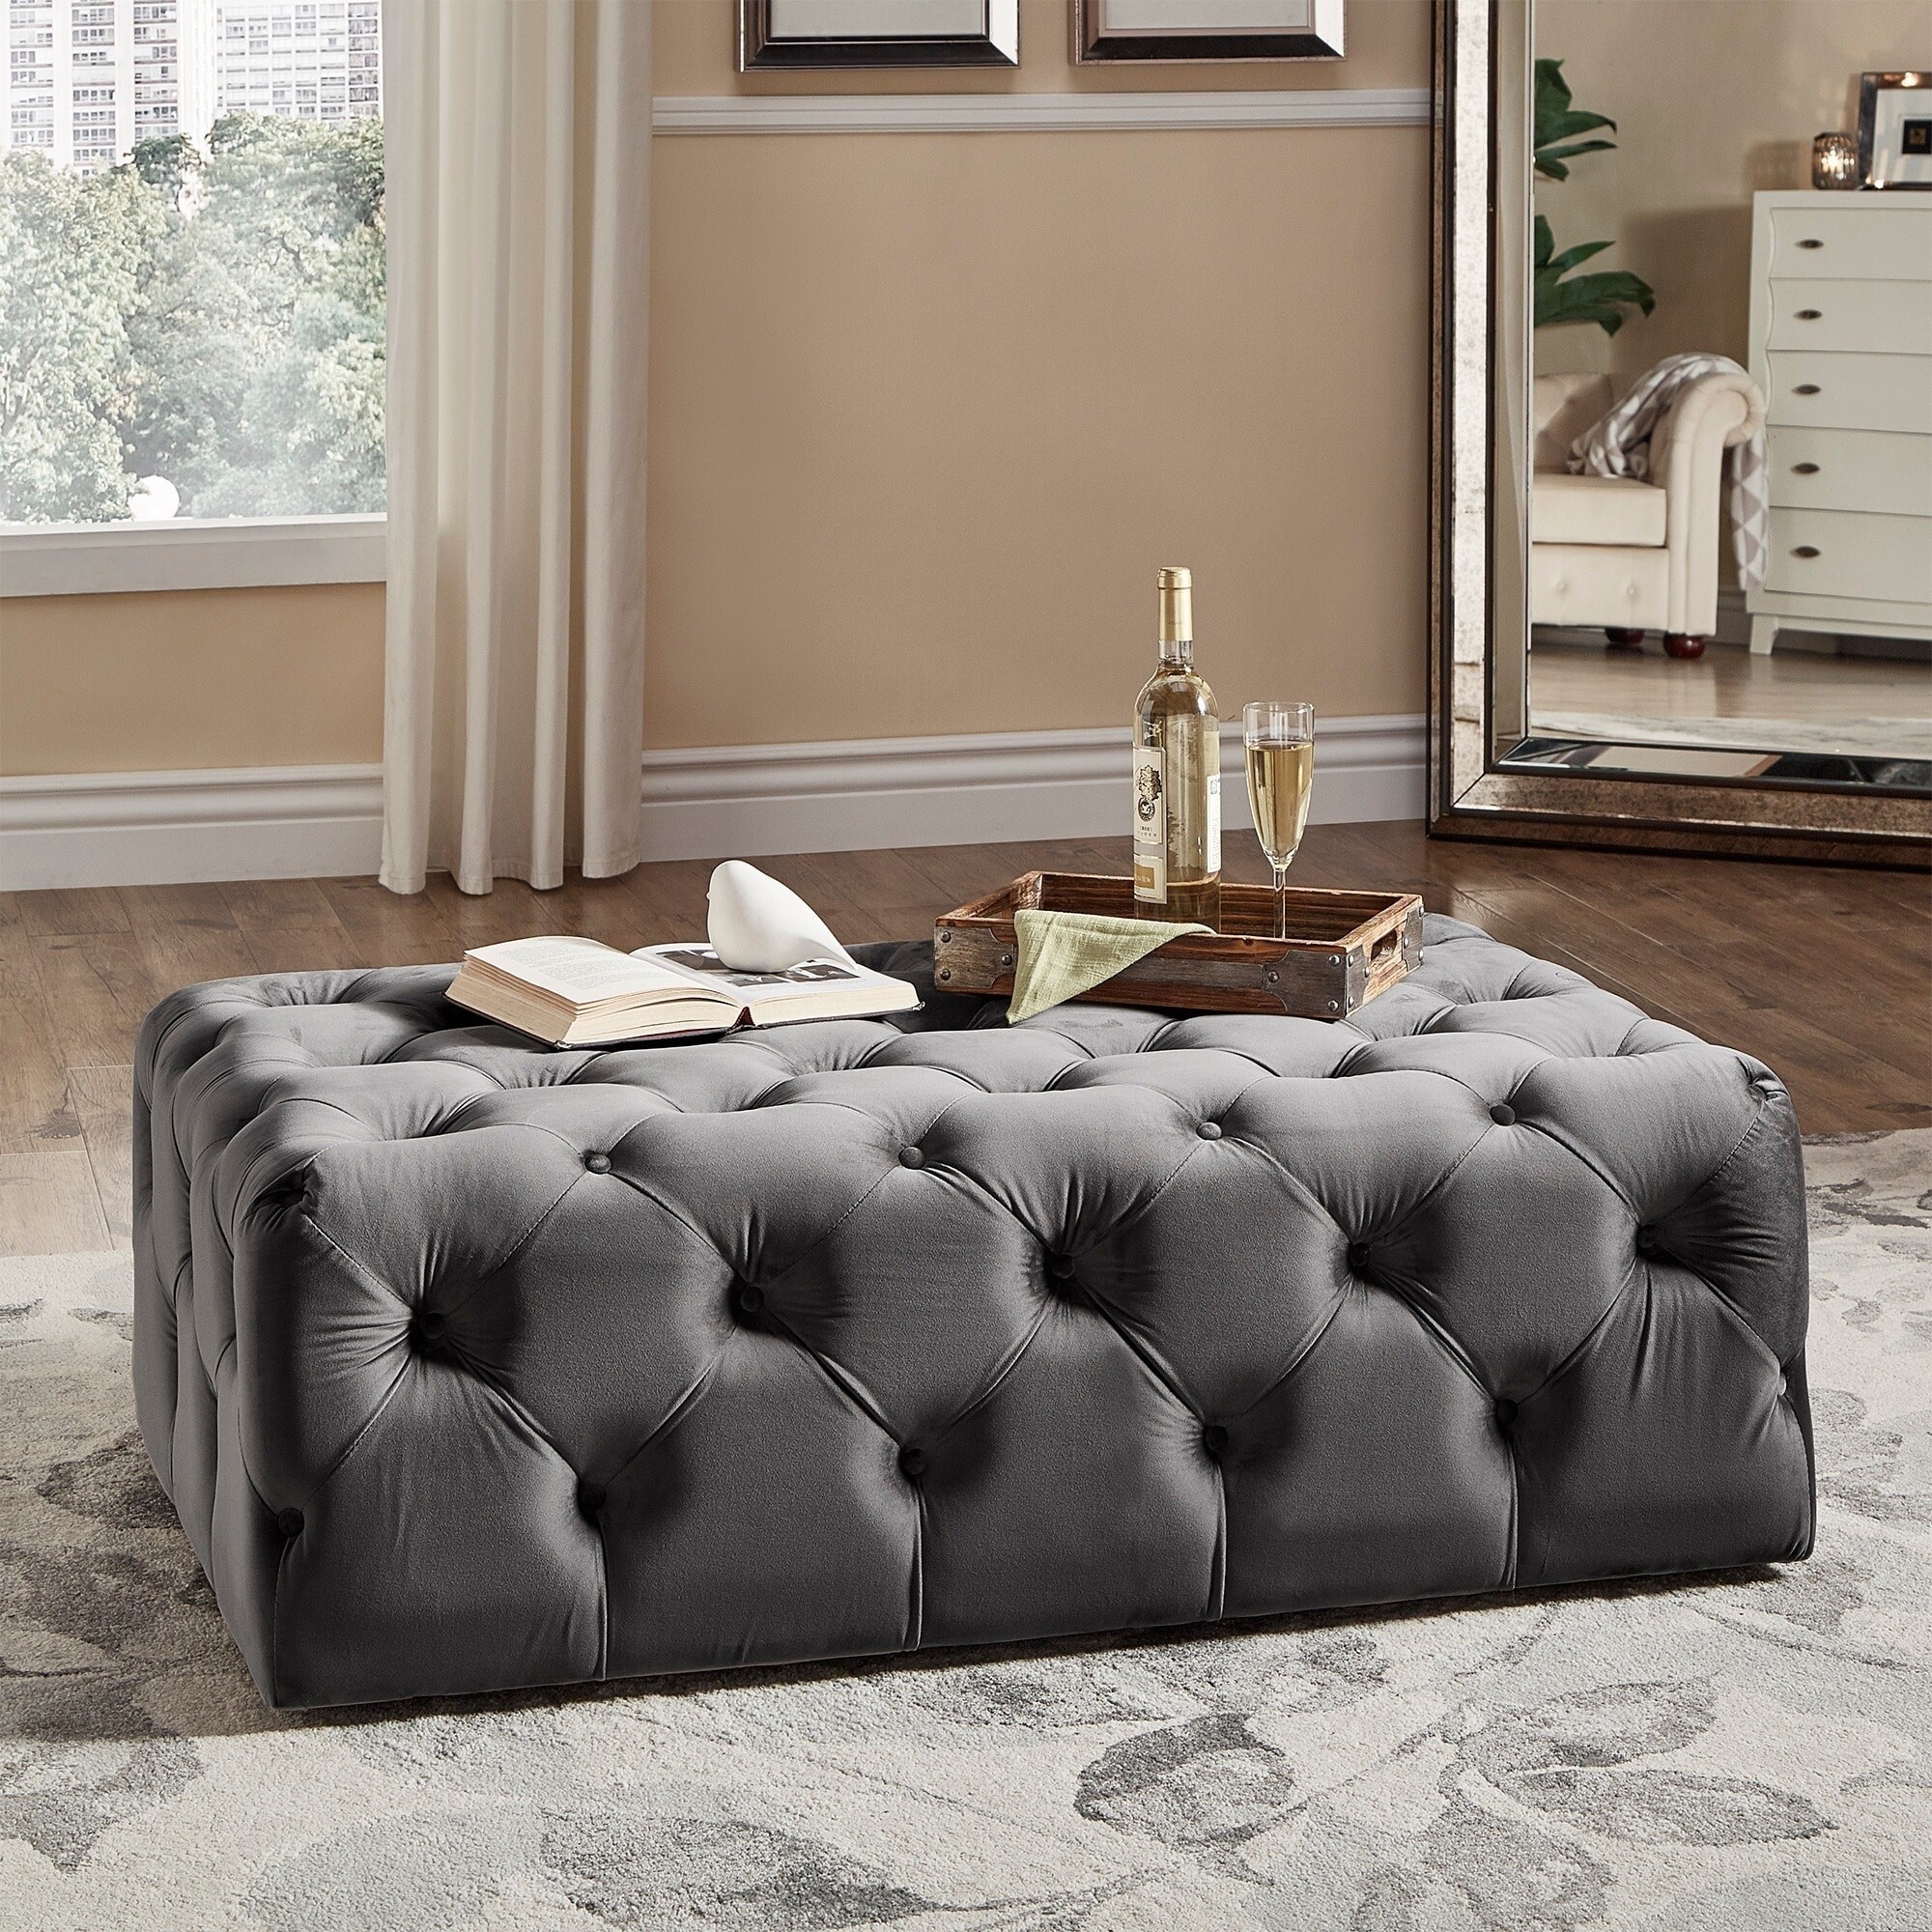 Shay Square Storage Trunk Coffee Table with Caster Wheels by iNSPIRE Q  Artisan - On Sale - Bed Bath & Beyond - 22408031